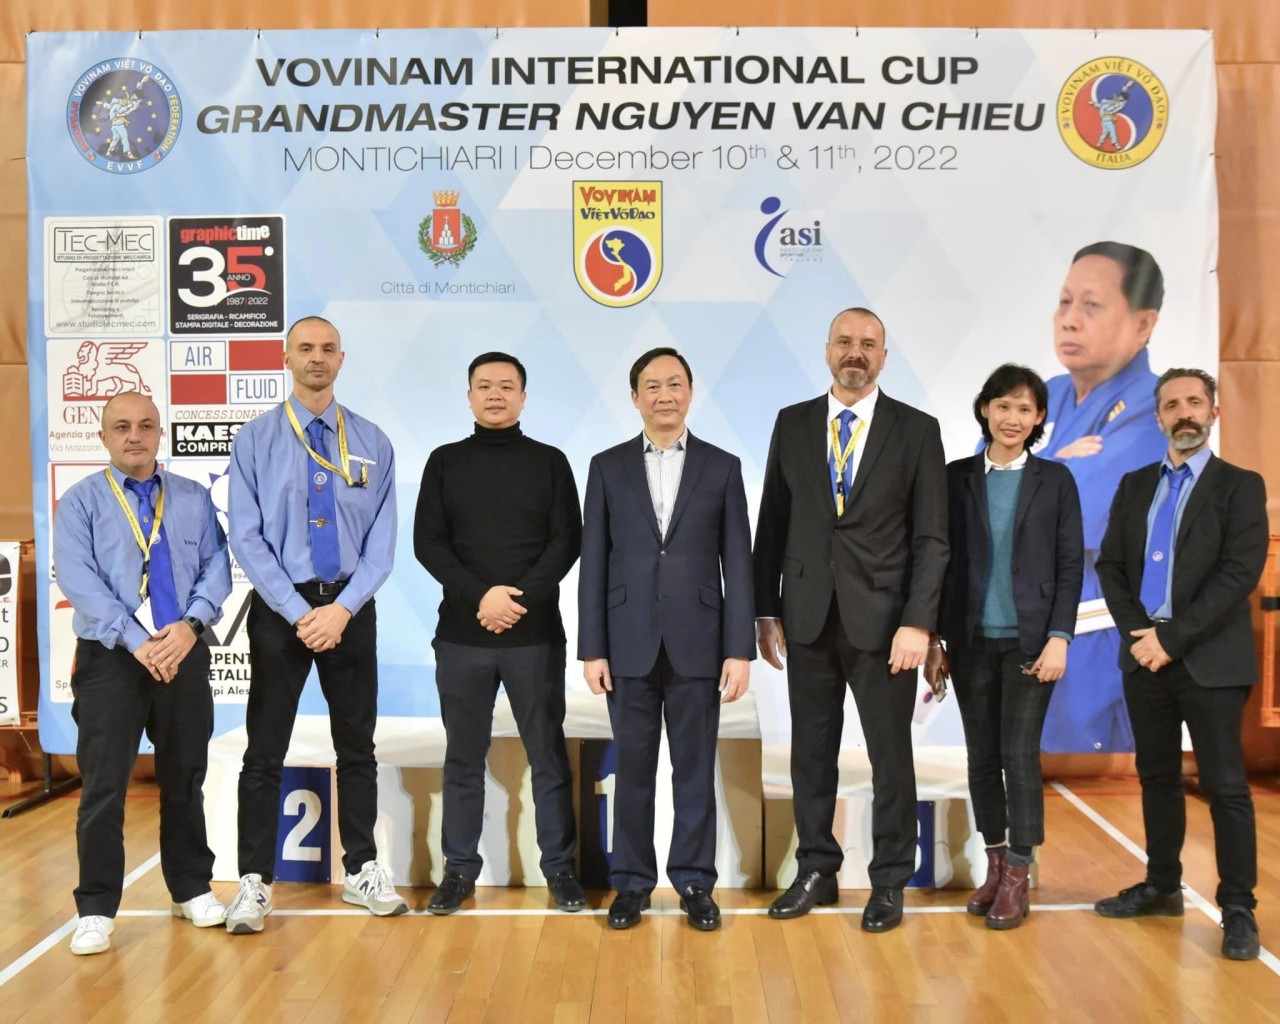 Vietnamese Ambassador to Italy Duong Hai Hung and two secretaries of the Vietnamese Embassy attend the Opening Ceremony of the International Vovinam Cup Grand Master Nguyen Van Chieu. Source: Laura Macchini/European Vovinam Viet Vo Dao Federation - EVVF